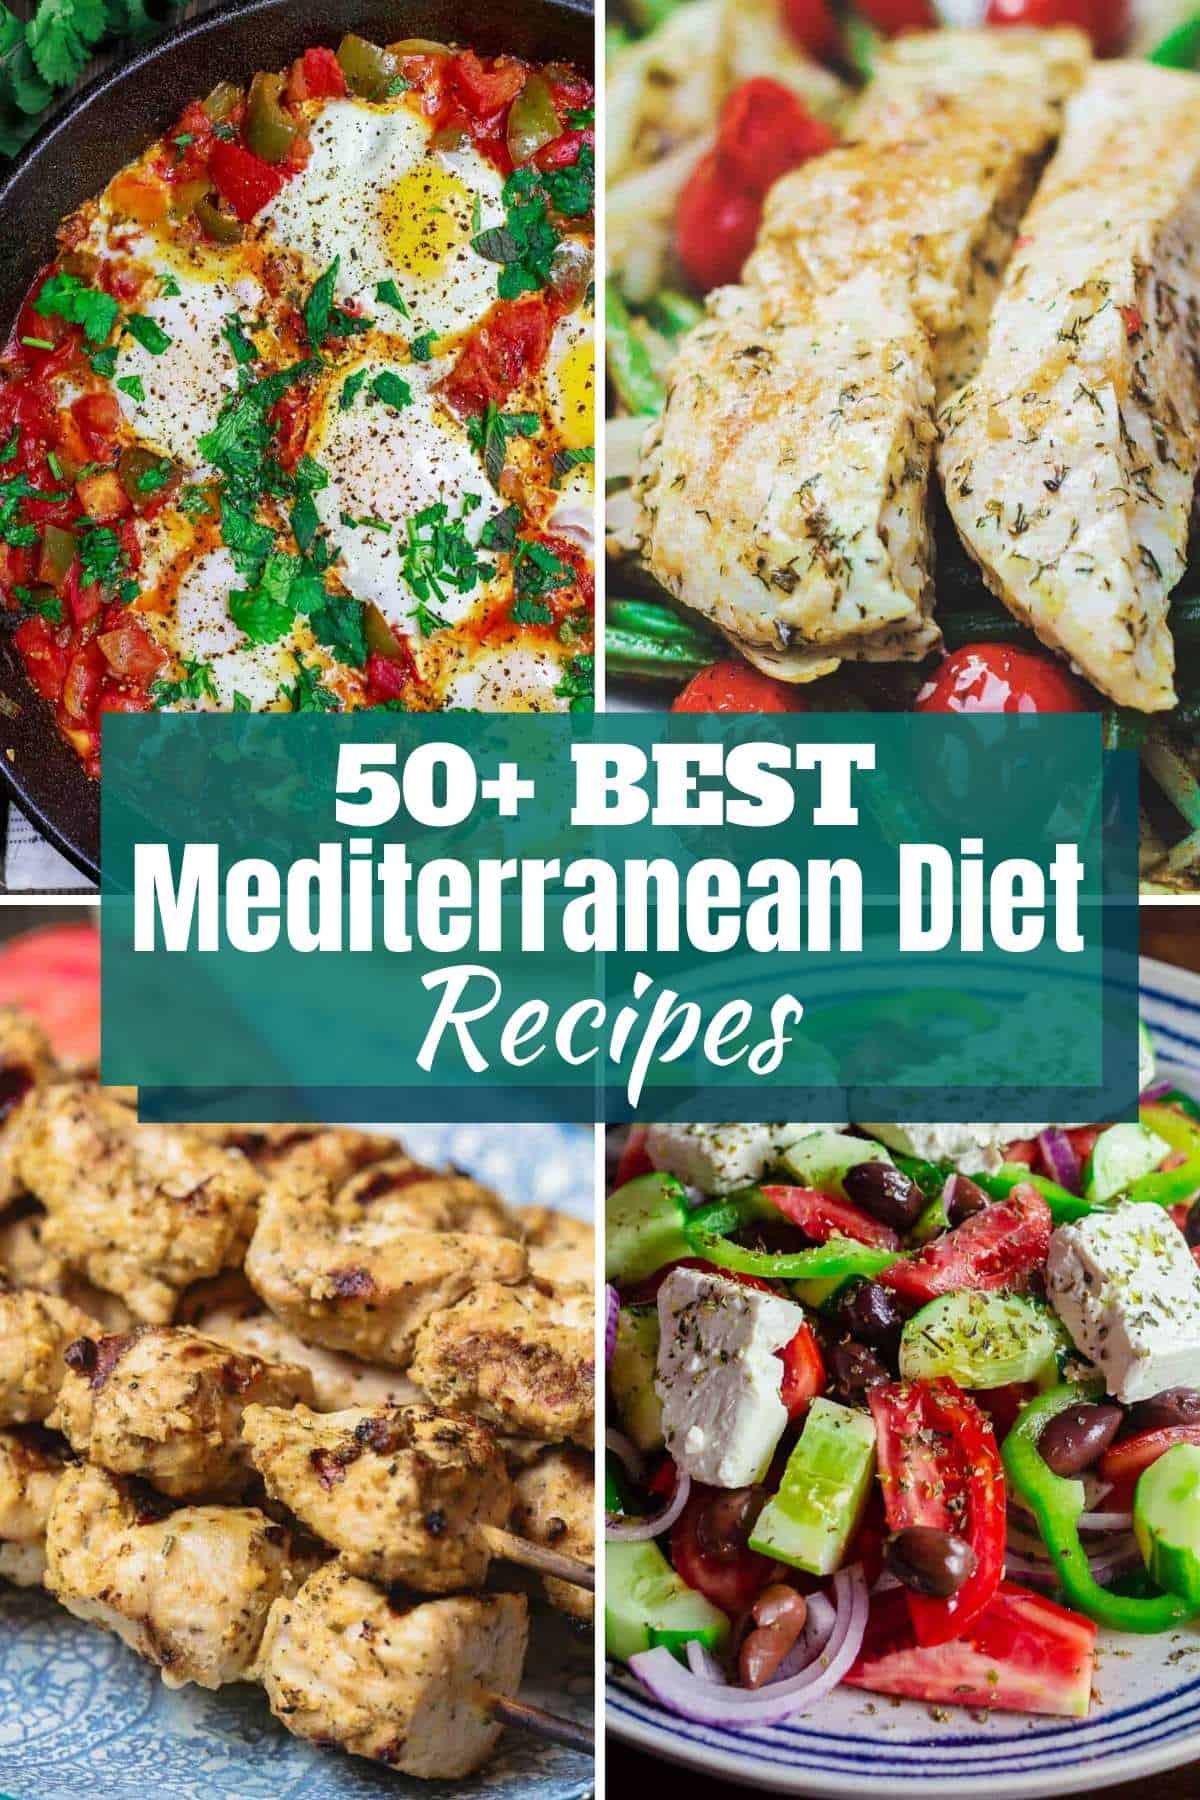 3 CLASSIC HEALTHY Mediterranean SALAD DRESSING Recipes. You'll WANT to EAT SALAD EVERYDAY!